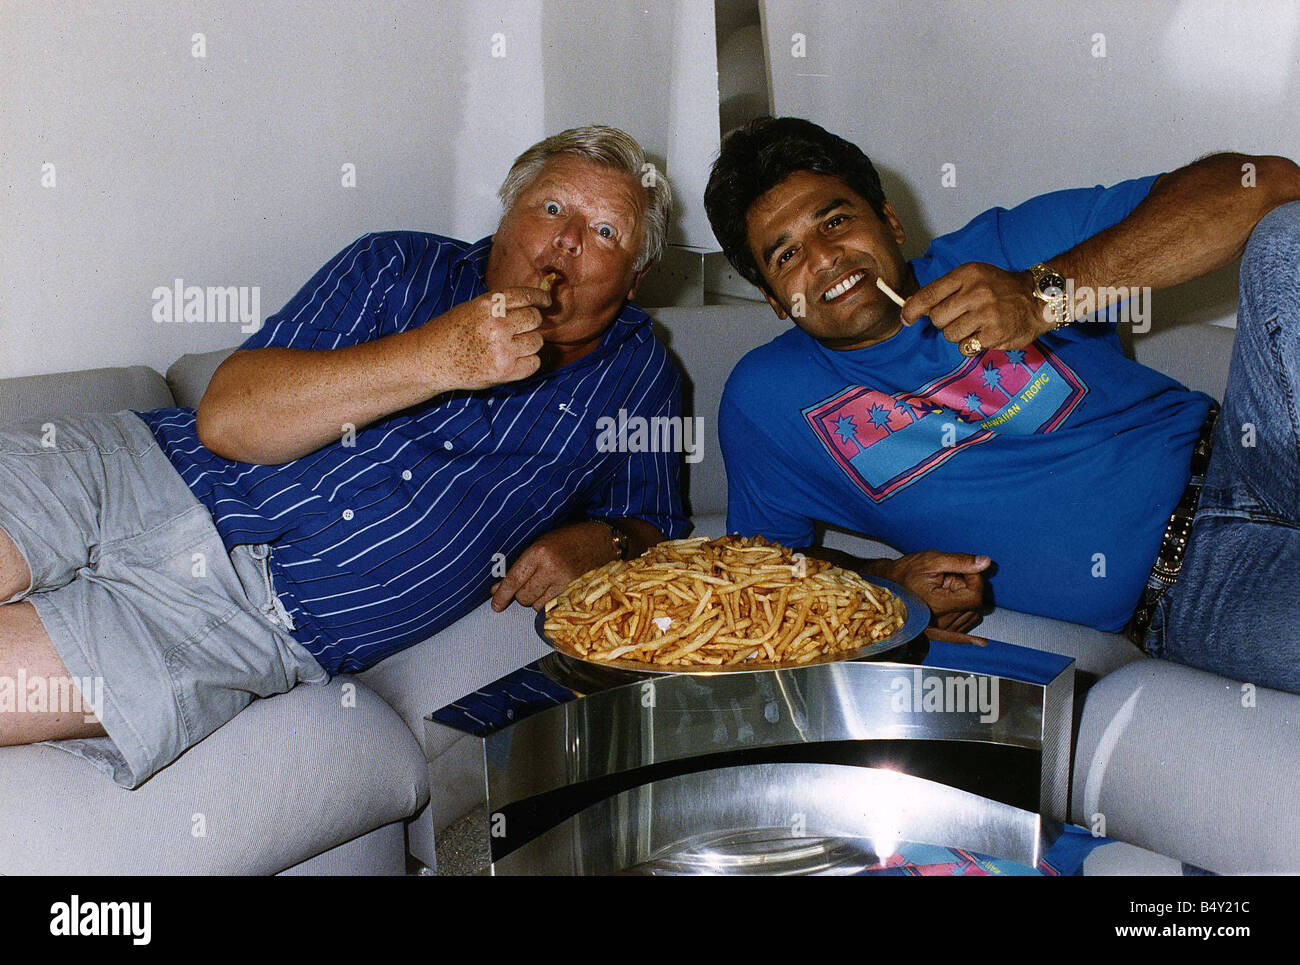 Benny Hill Actor Comedian With Fellow Actor Erik Estrada Eating A Plate Of Chips Stock Photo